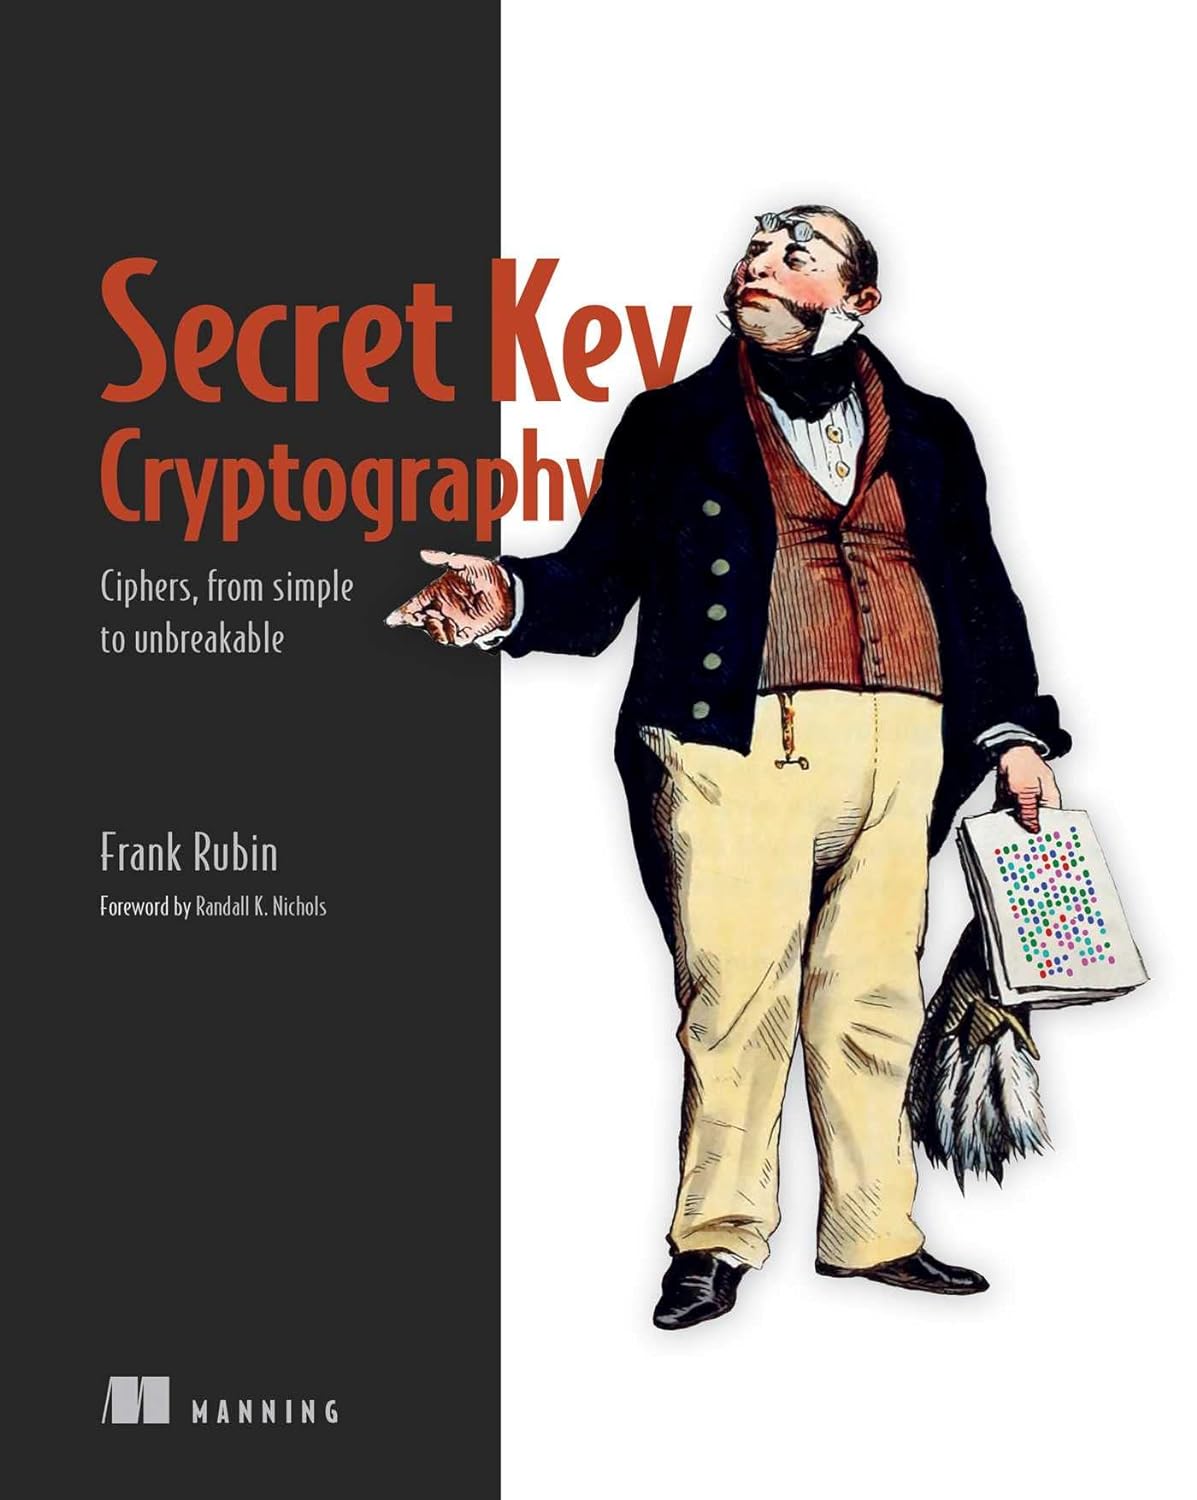 Secret Key Cryptography: Ciphers, from_ simple to unbreakable by Frank Rubin 